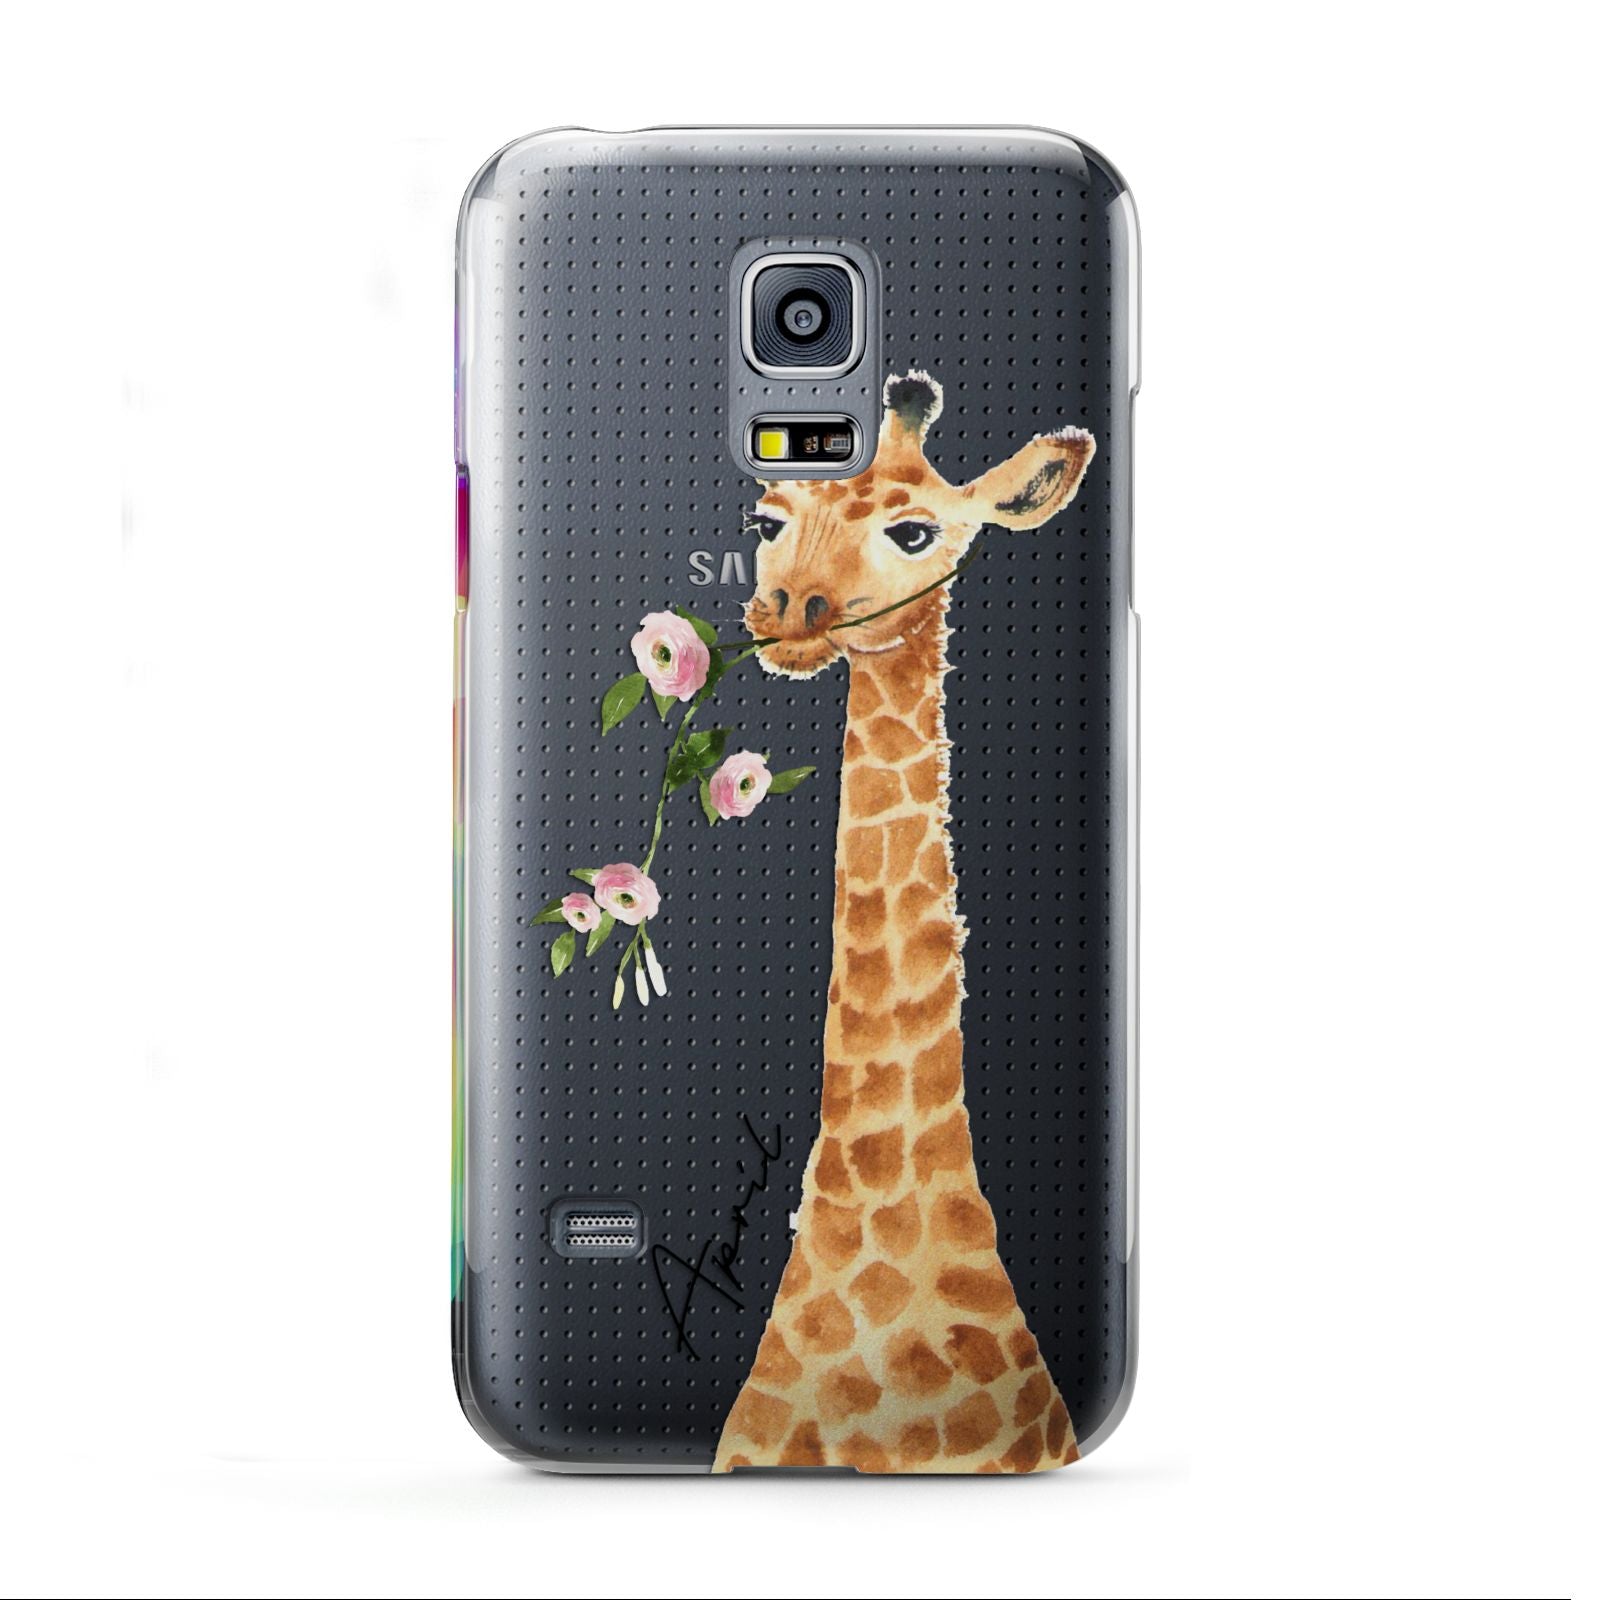 Personalised Giraffe with Name Samsung Galaxy S5 Mini Case